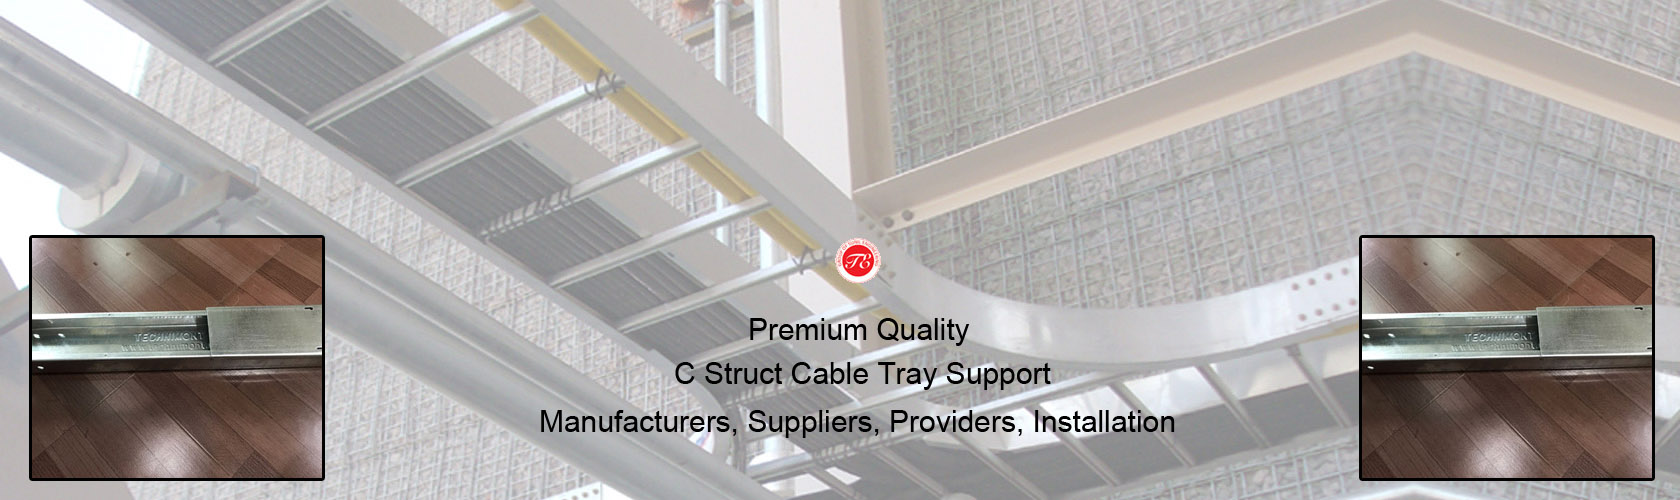 C Struct Cable Tray Support